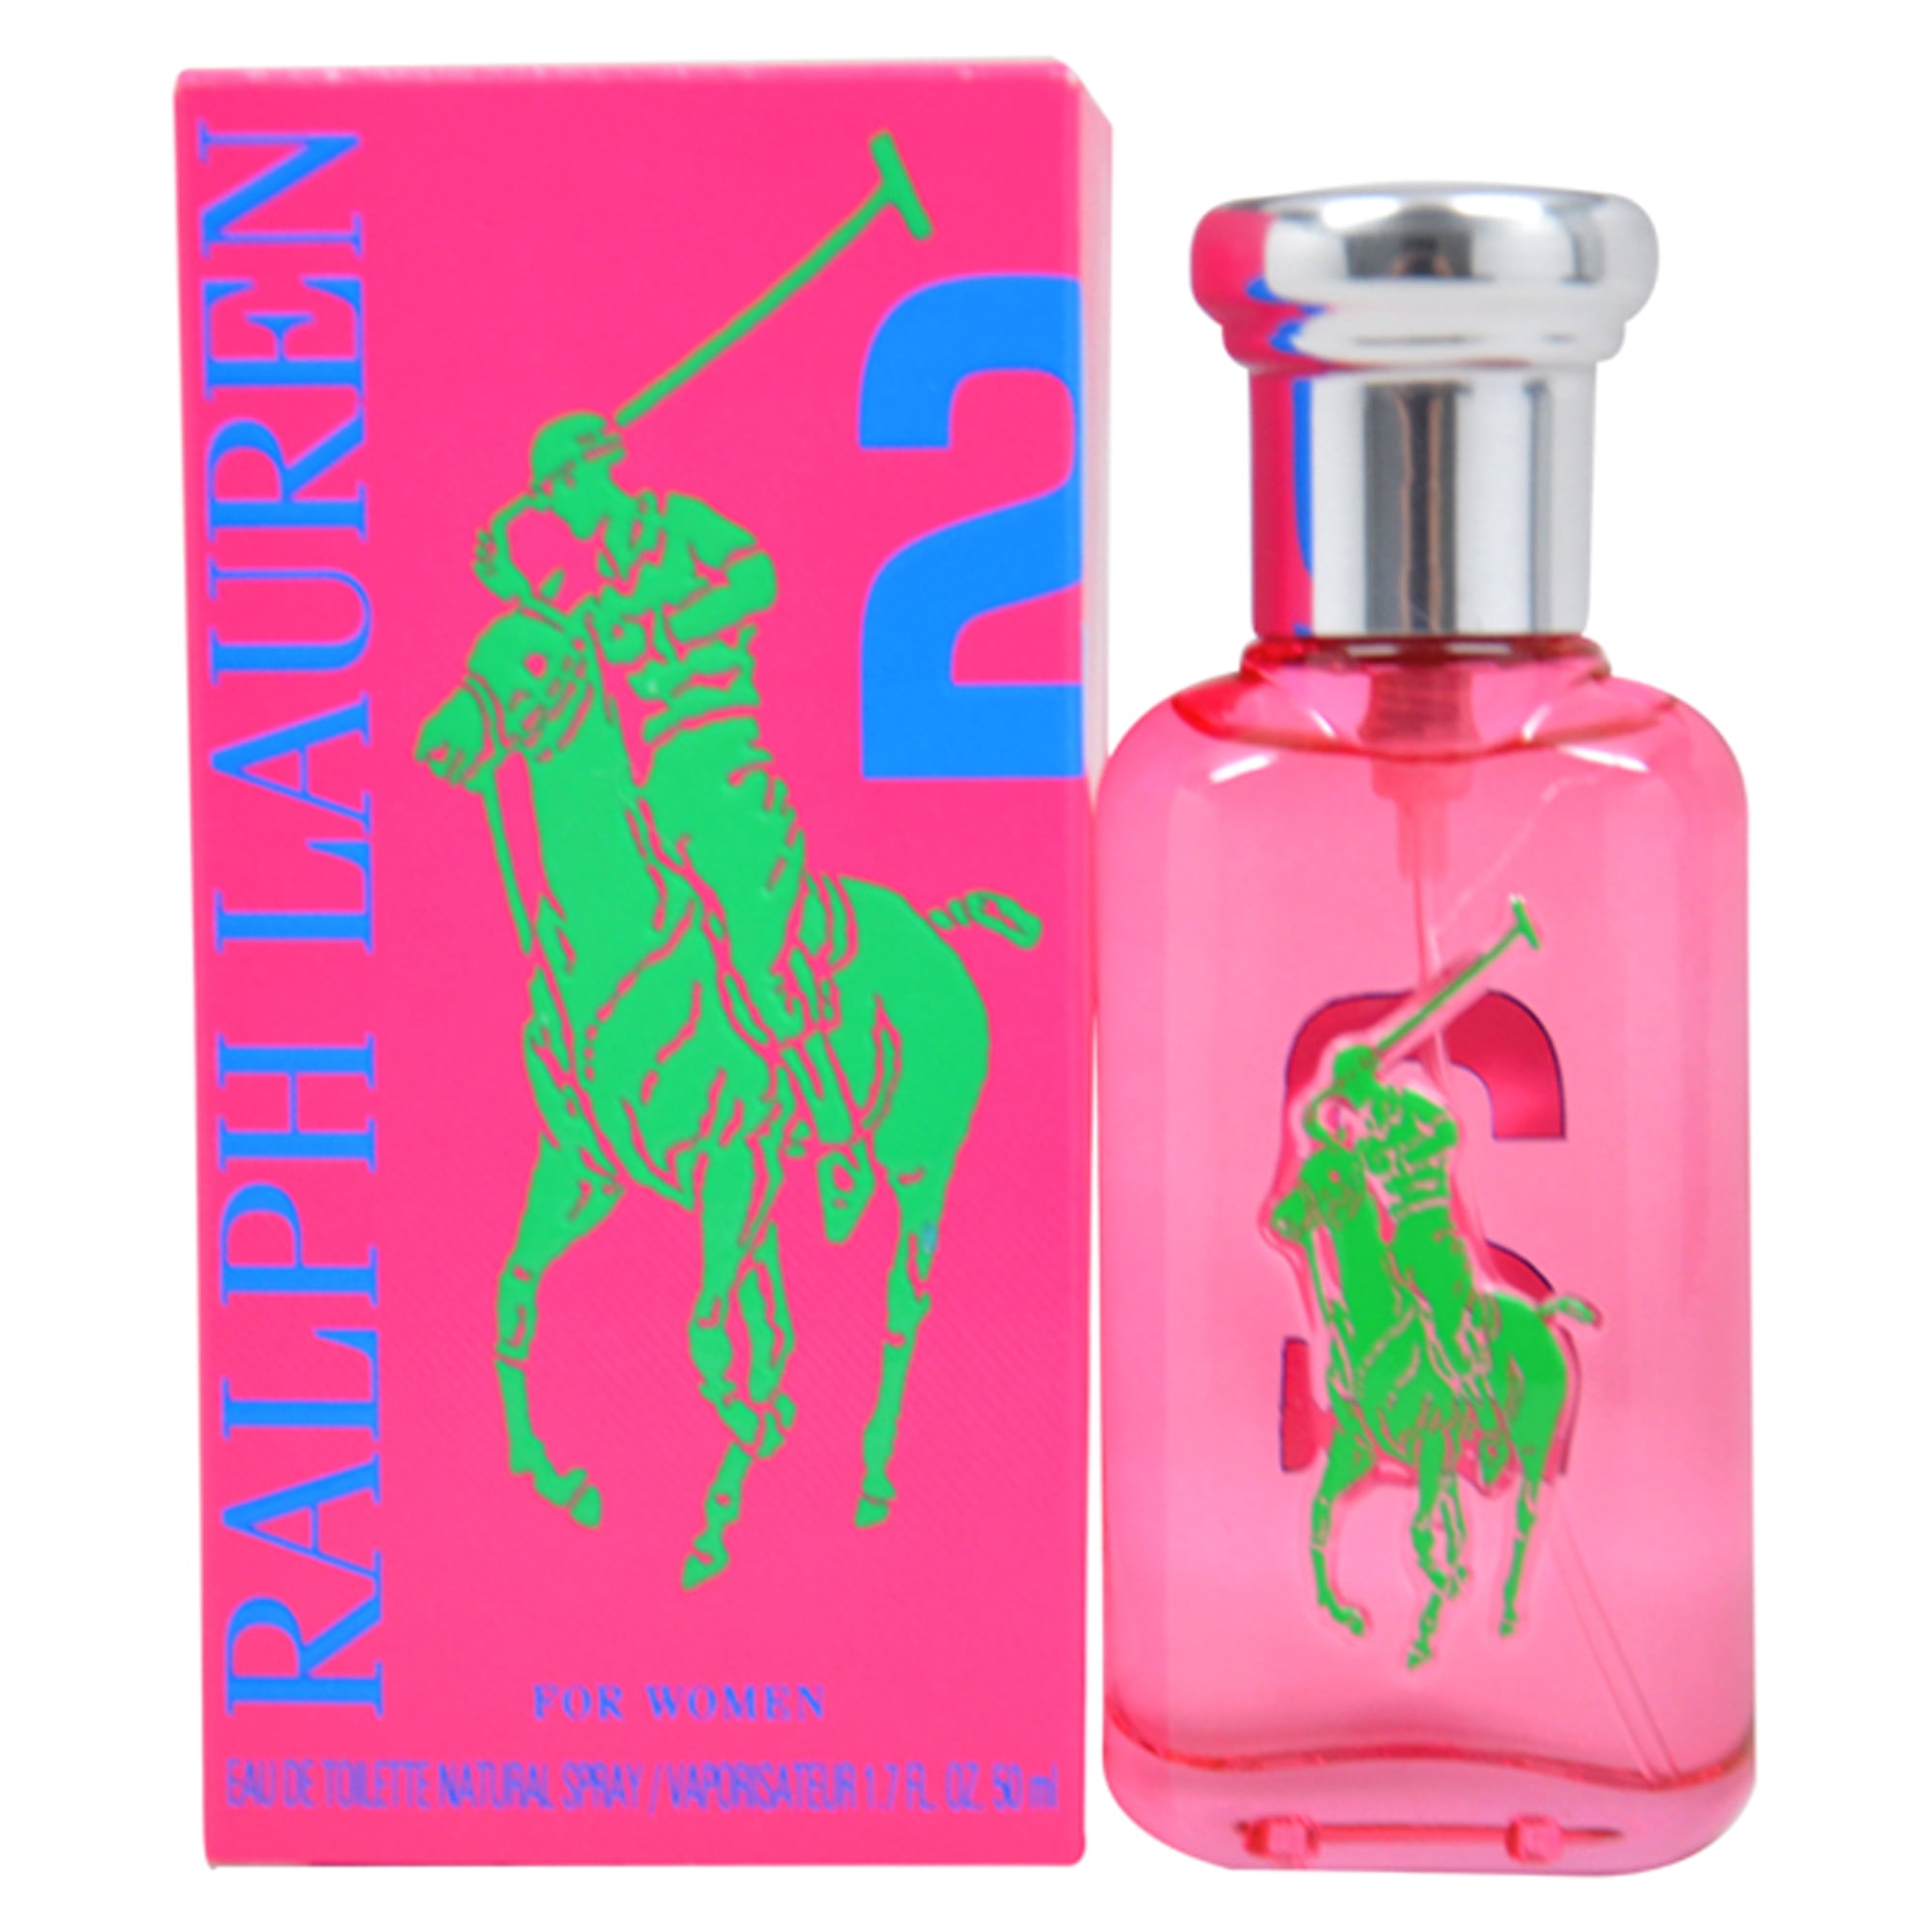 The Big Pony Collection - 2 by Ralph Lauren for Women  oz EDT Spray |  Walmart Canada